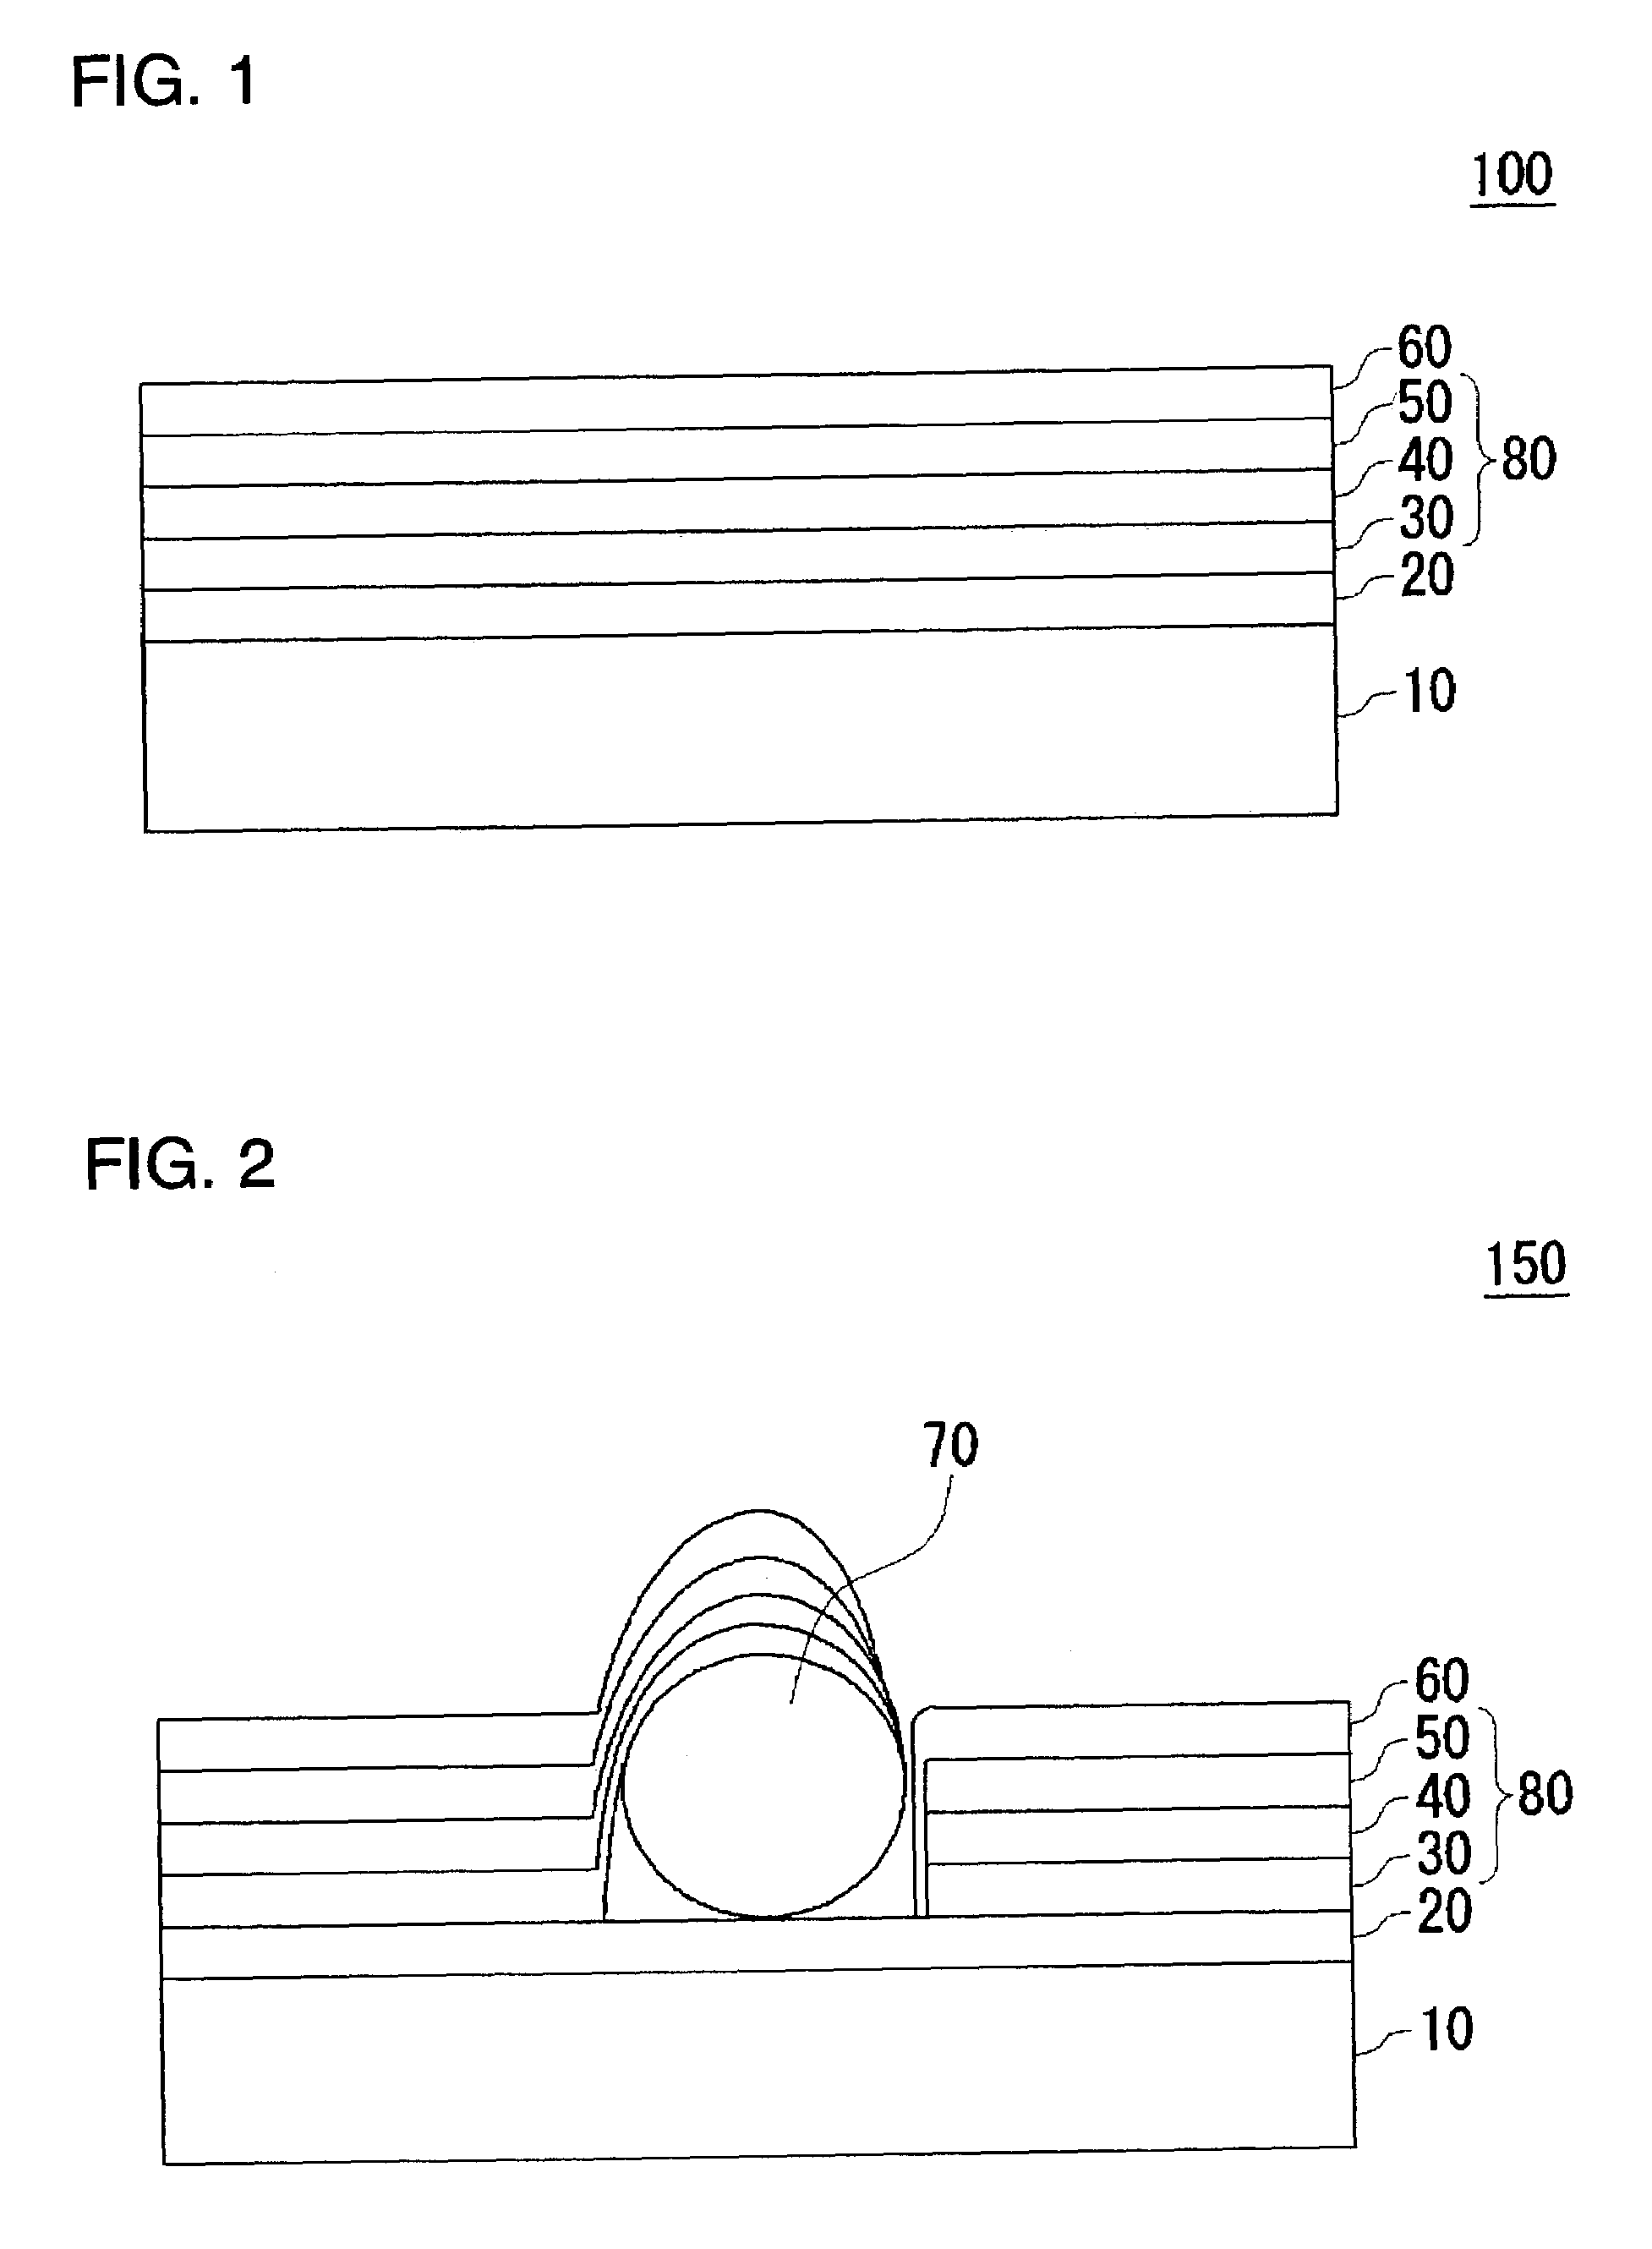 Method of manufacturing an organic electroluminescent device and resulting device